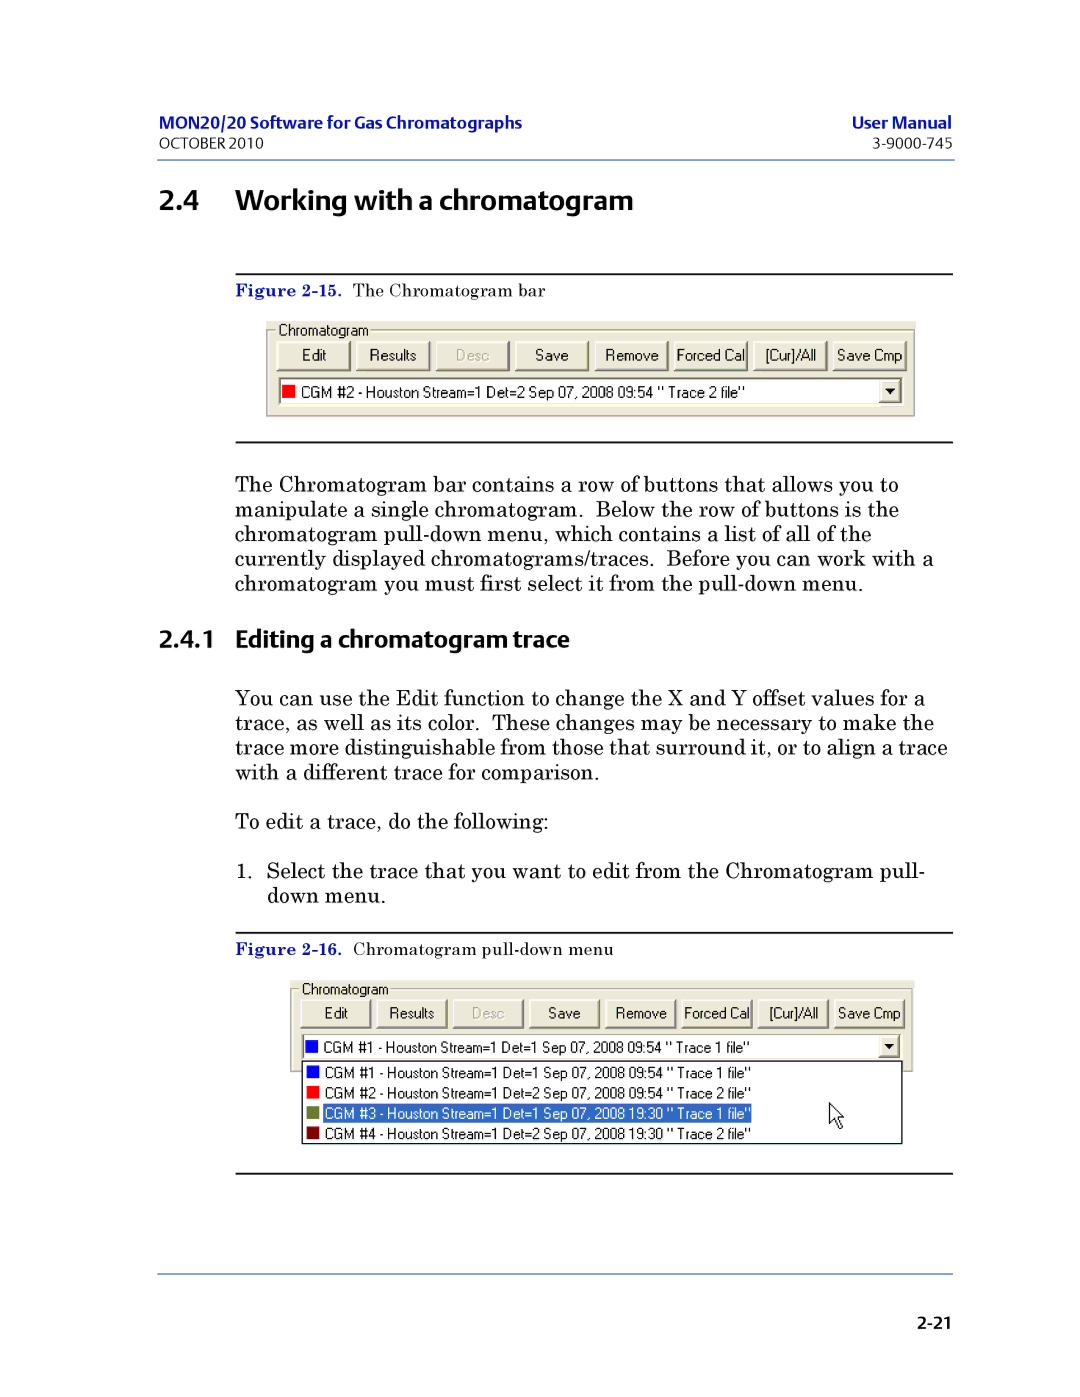 Emerson Process Management 3-9000-745 manual Working with a chromatogram, Editing a chromatogram trace 